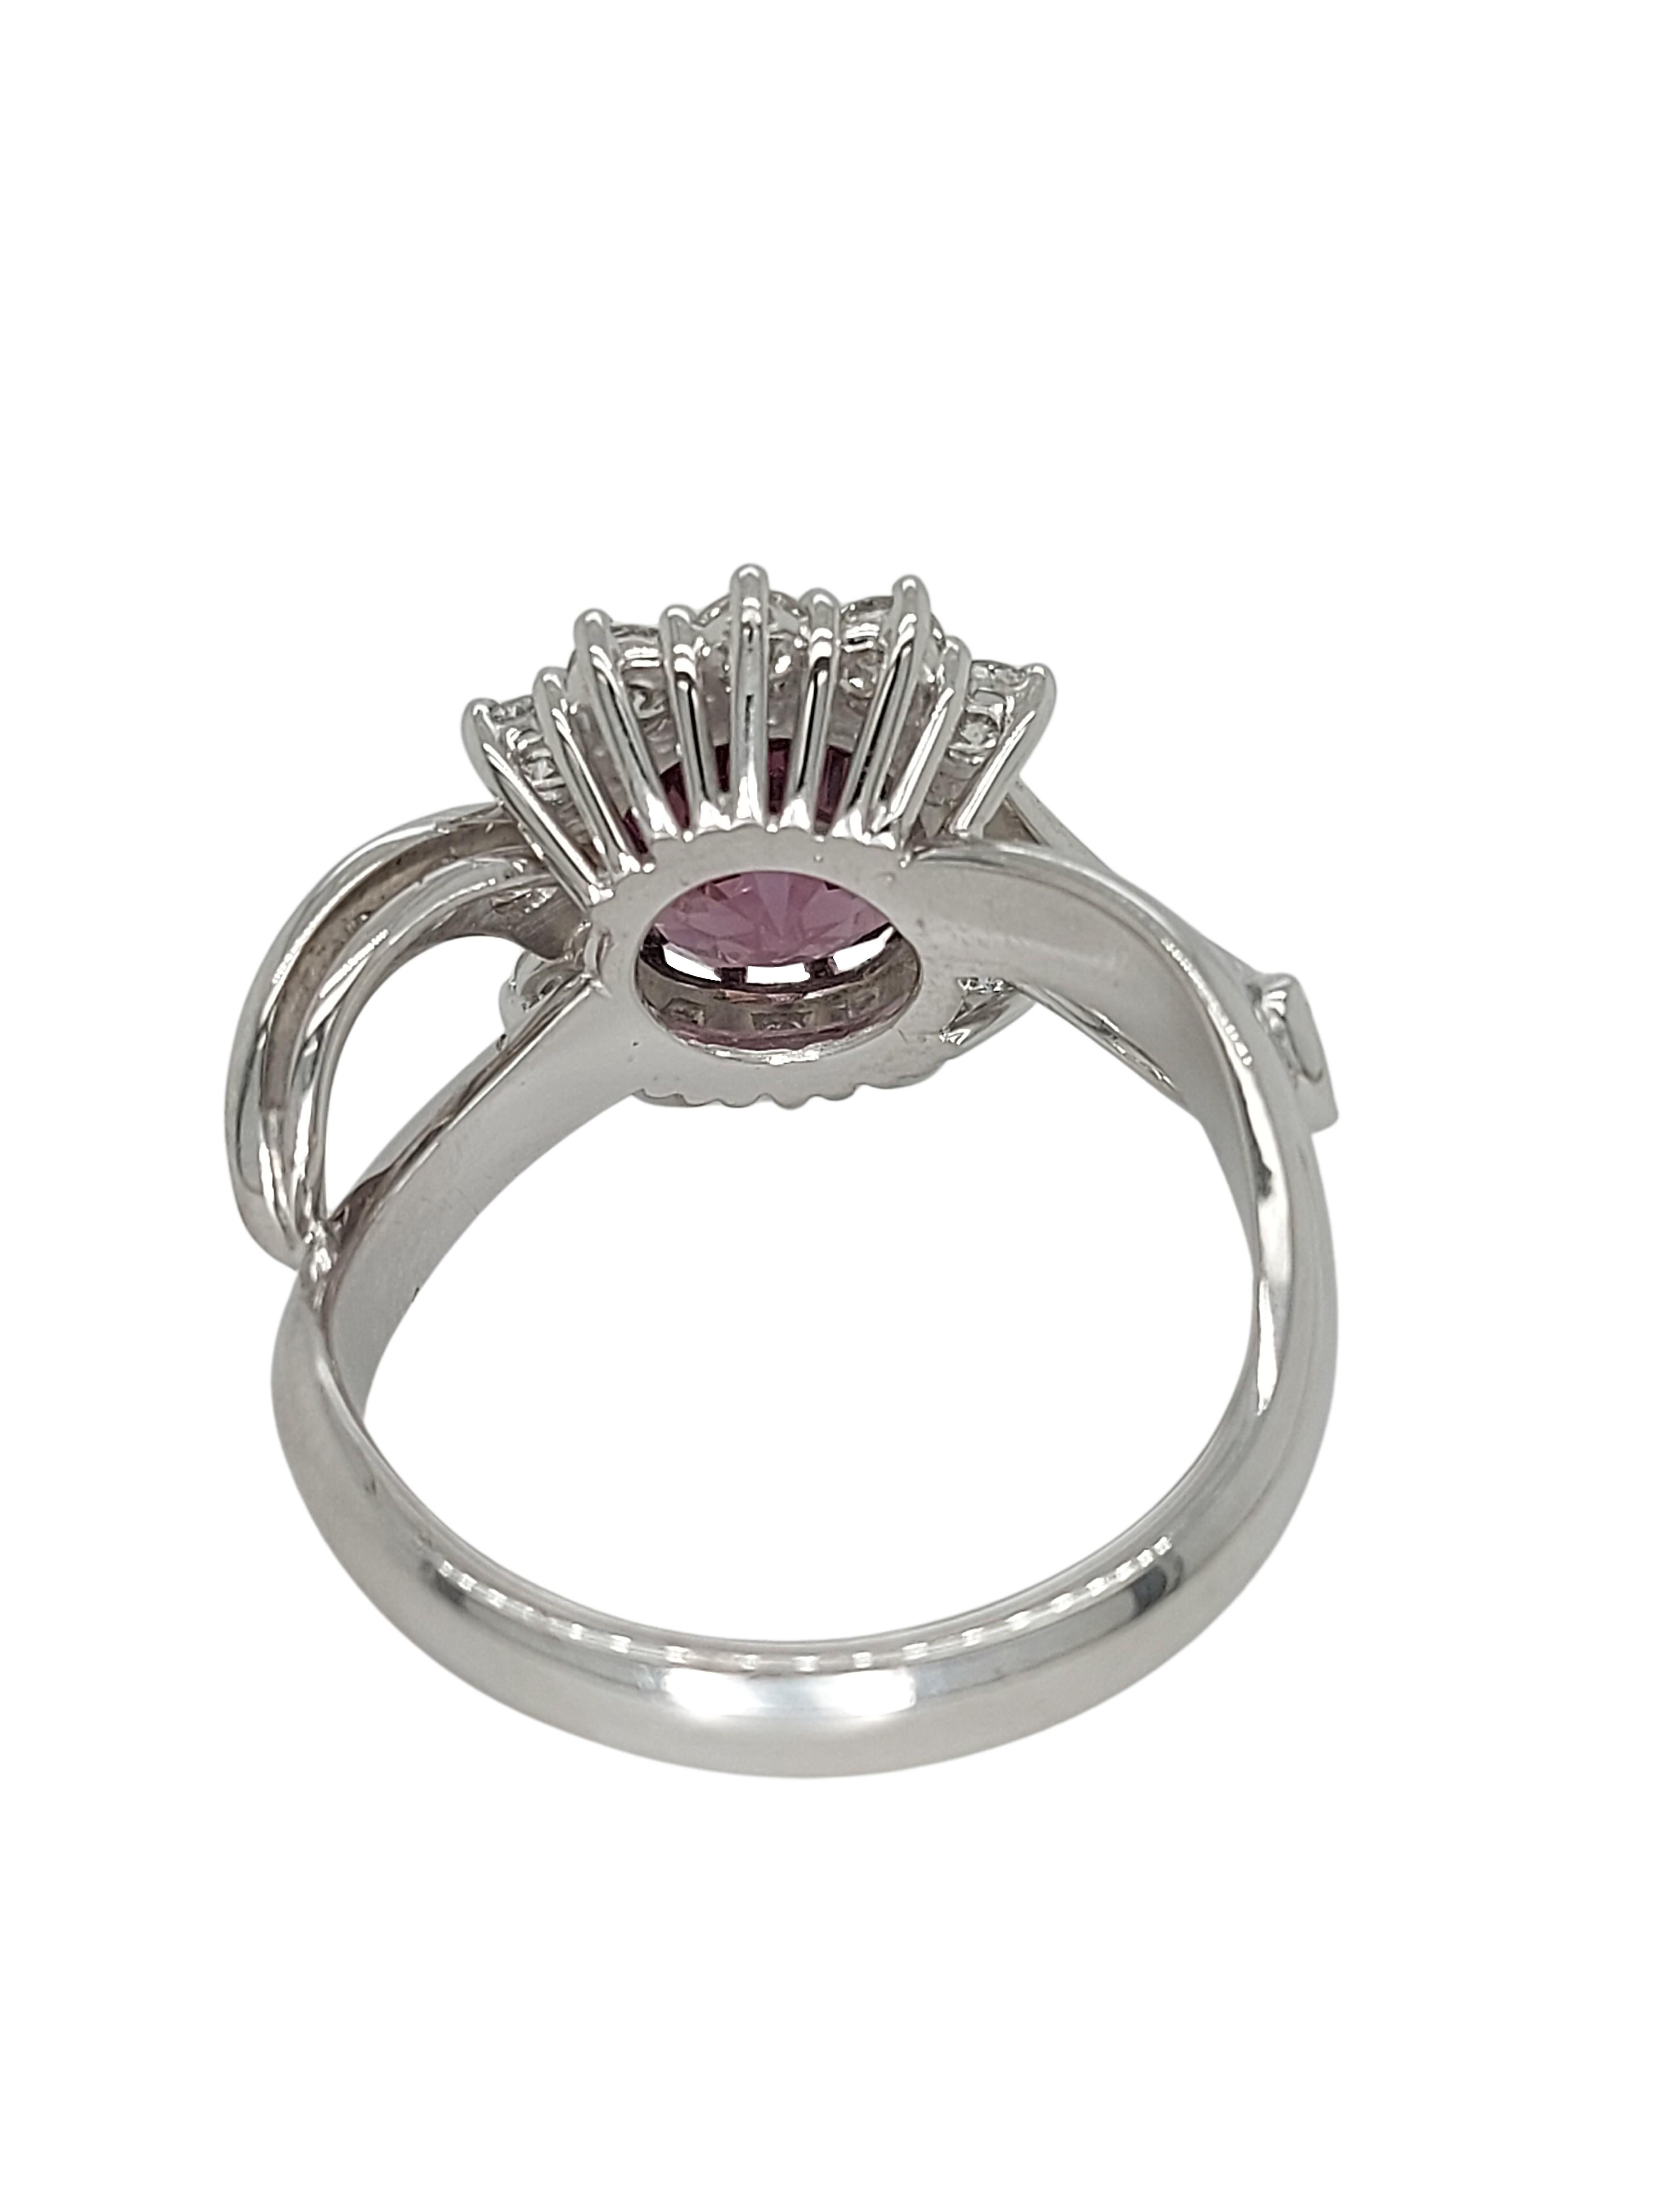 18kt White Gold Ring with a 3.25 Ct No Heat Spinel Stone and 1.2ct Diamonds For Sale 4